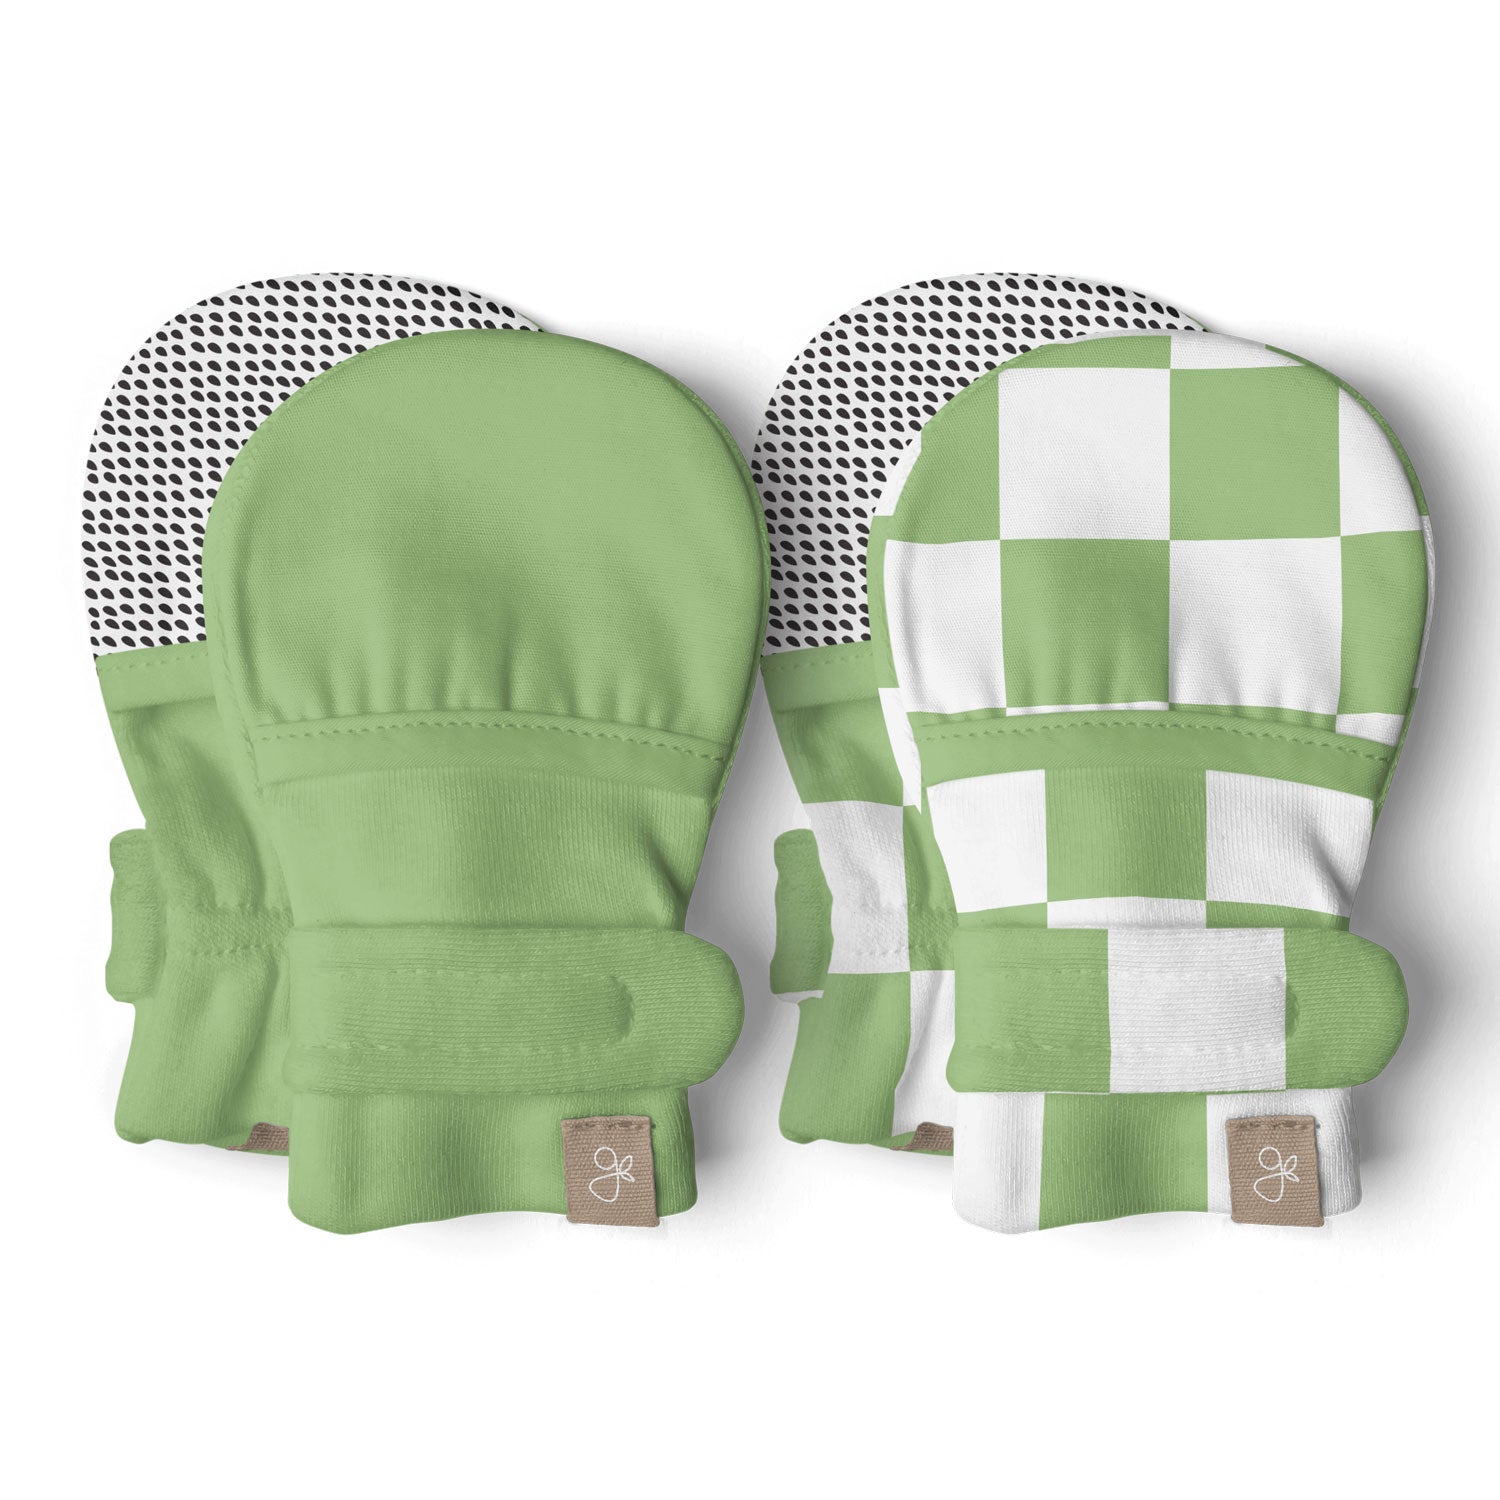 goumikids Stay On 2-Pack Mitts - Matcha + Cabana Green Check